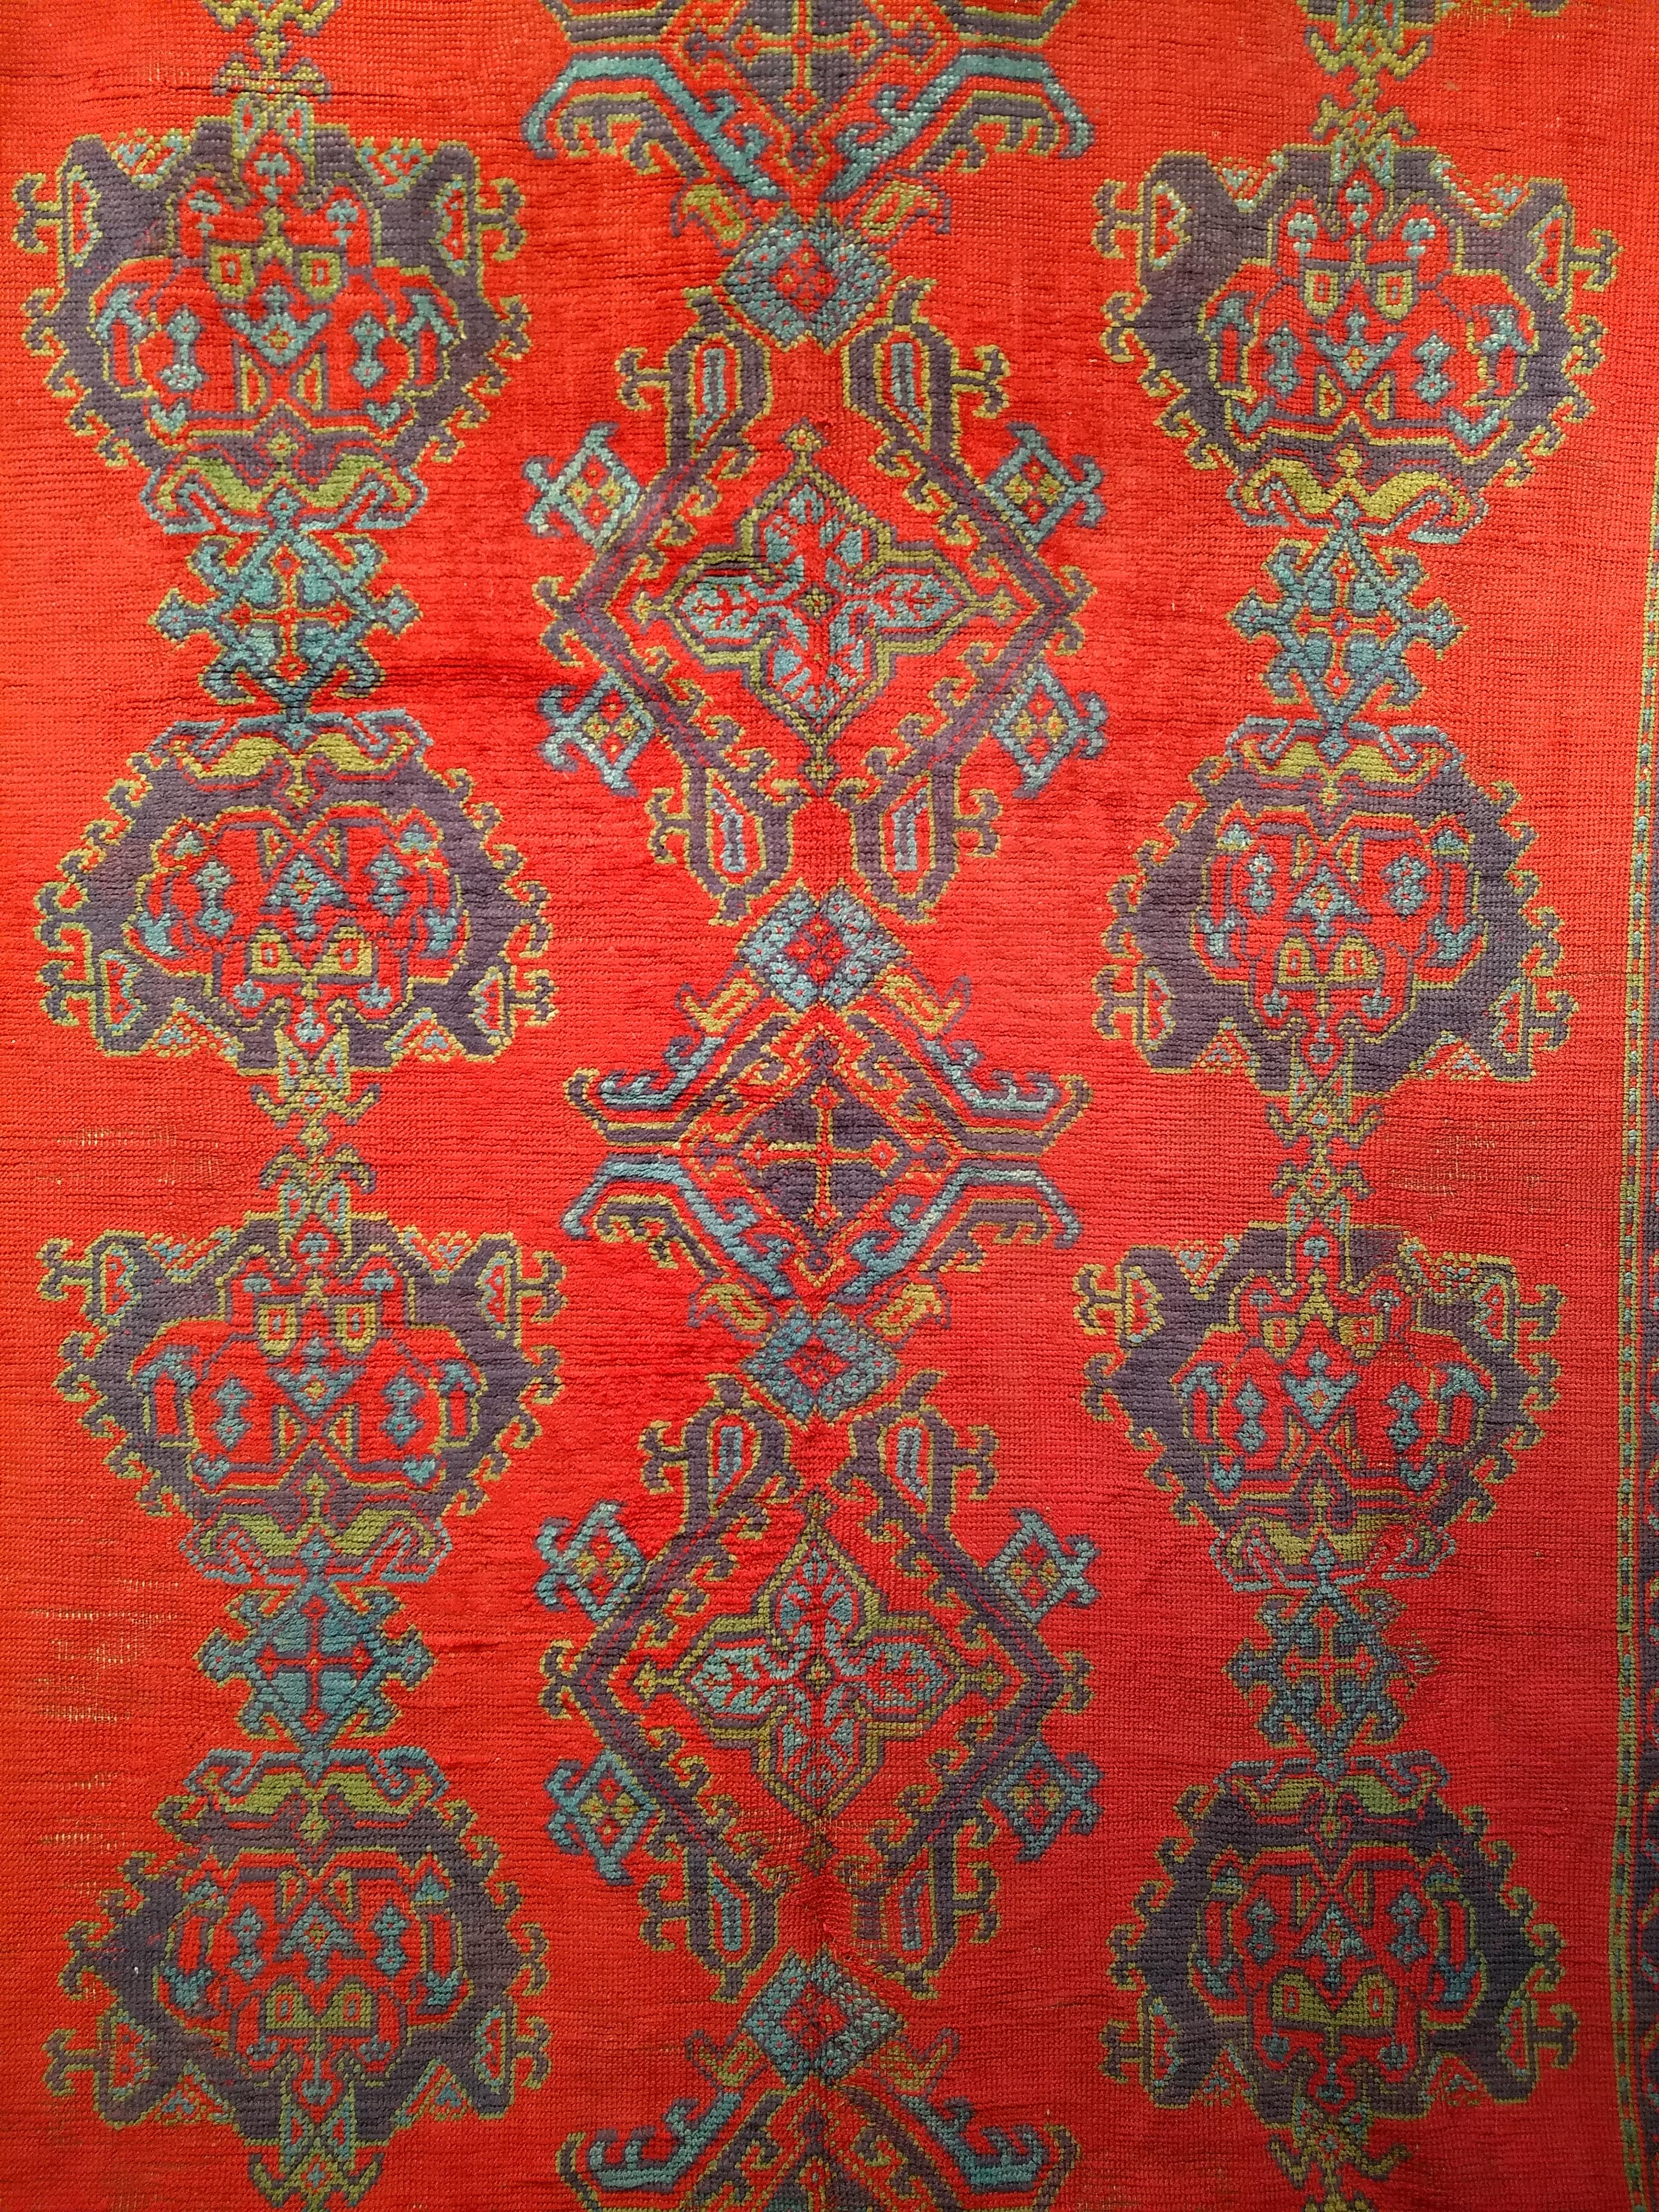 The  room size Turkish Oushak Rug has an all-over design set in a beautiful and rich red color hand-knotted in the early 1900s in Anatolia. There are three columns of large geometric design in colors of blue, green, purple, and yellow that are